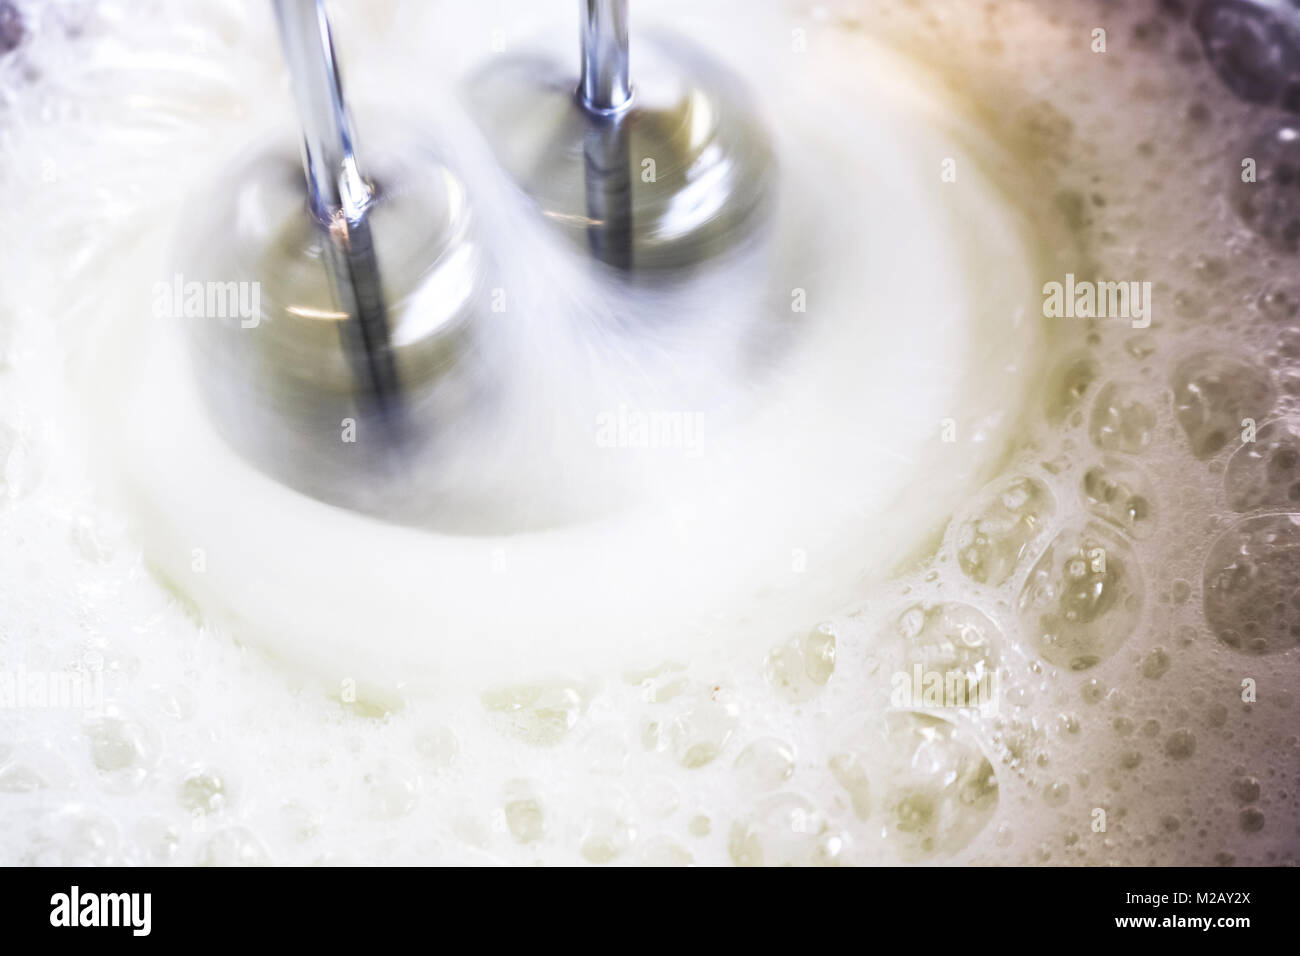 Mixer in motion whipping frothy egg whites in a bowl to make meringue Stock Photo